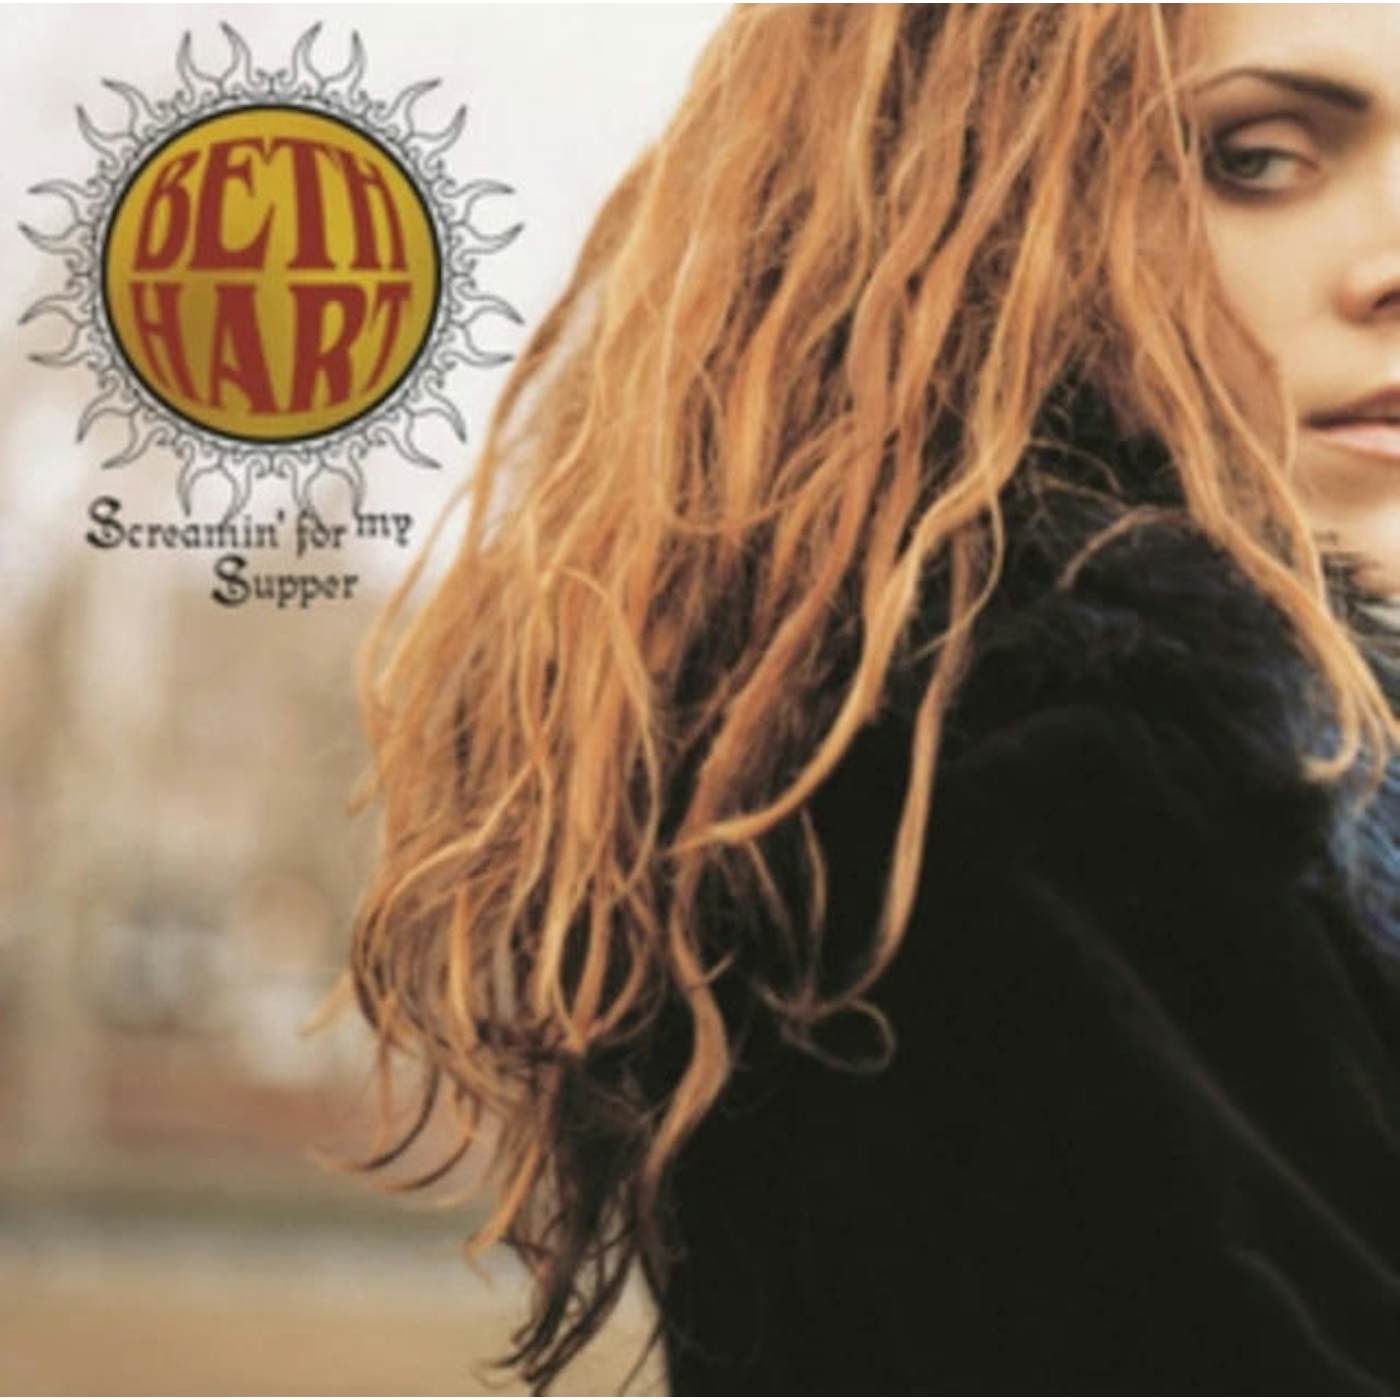 Beth Hart - Screaming for my Supper